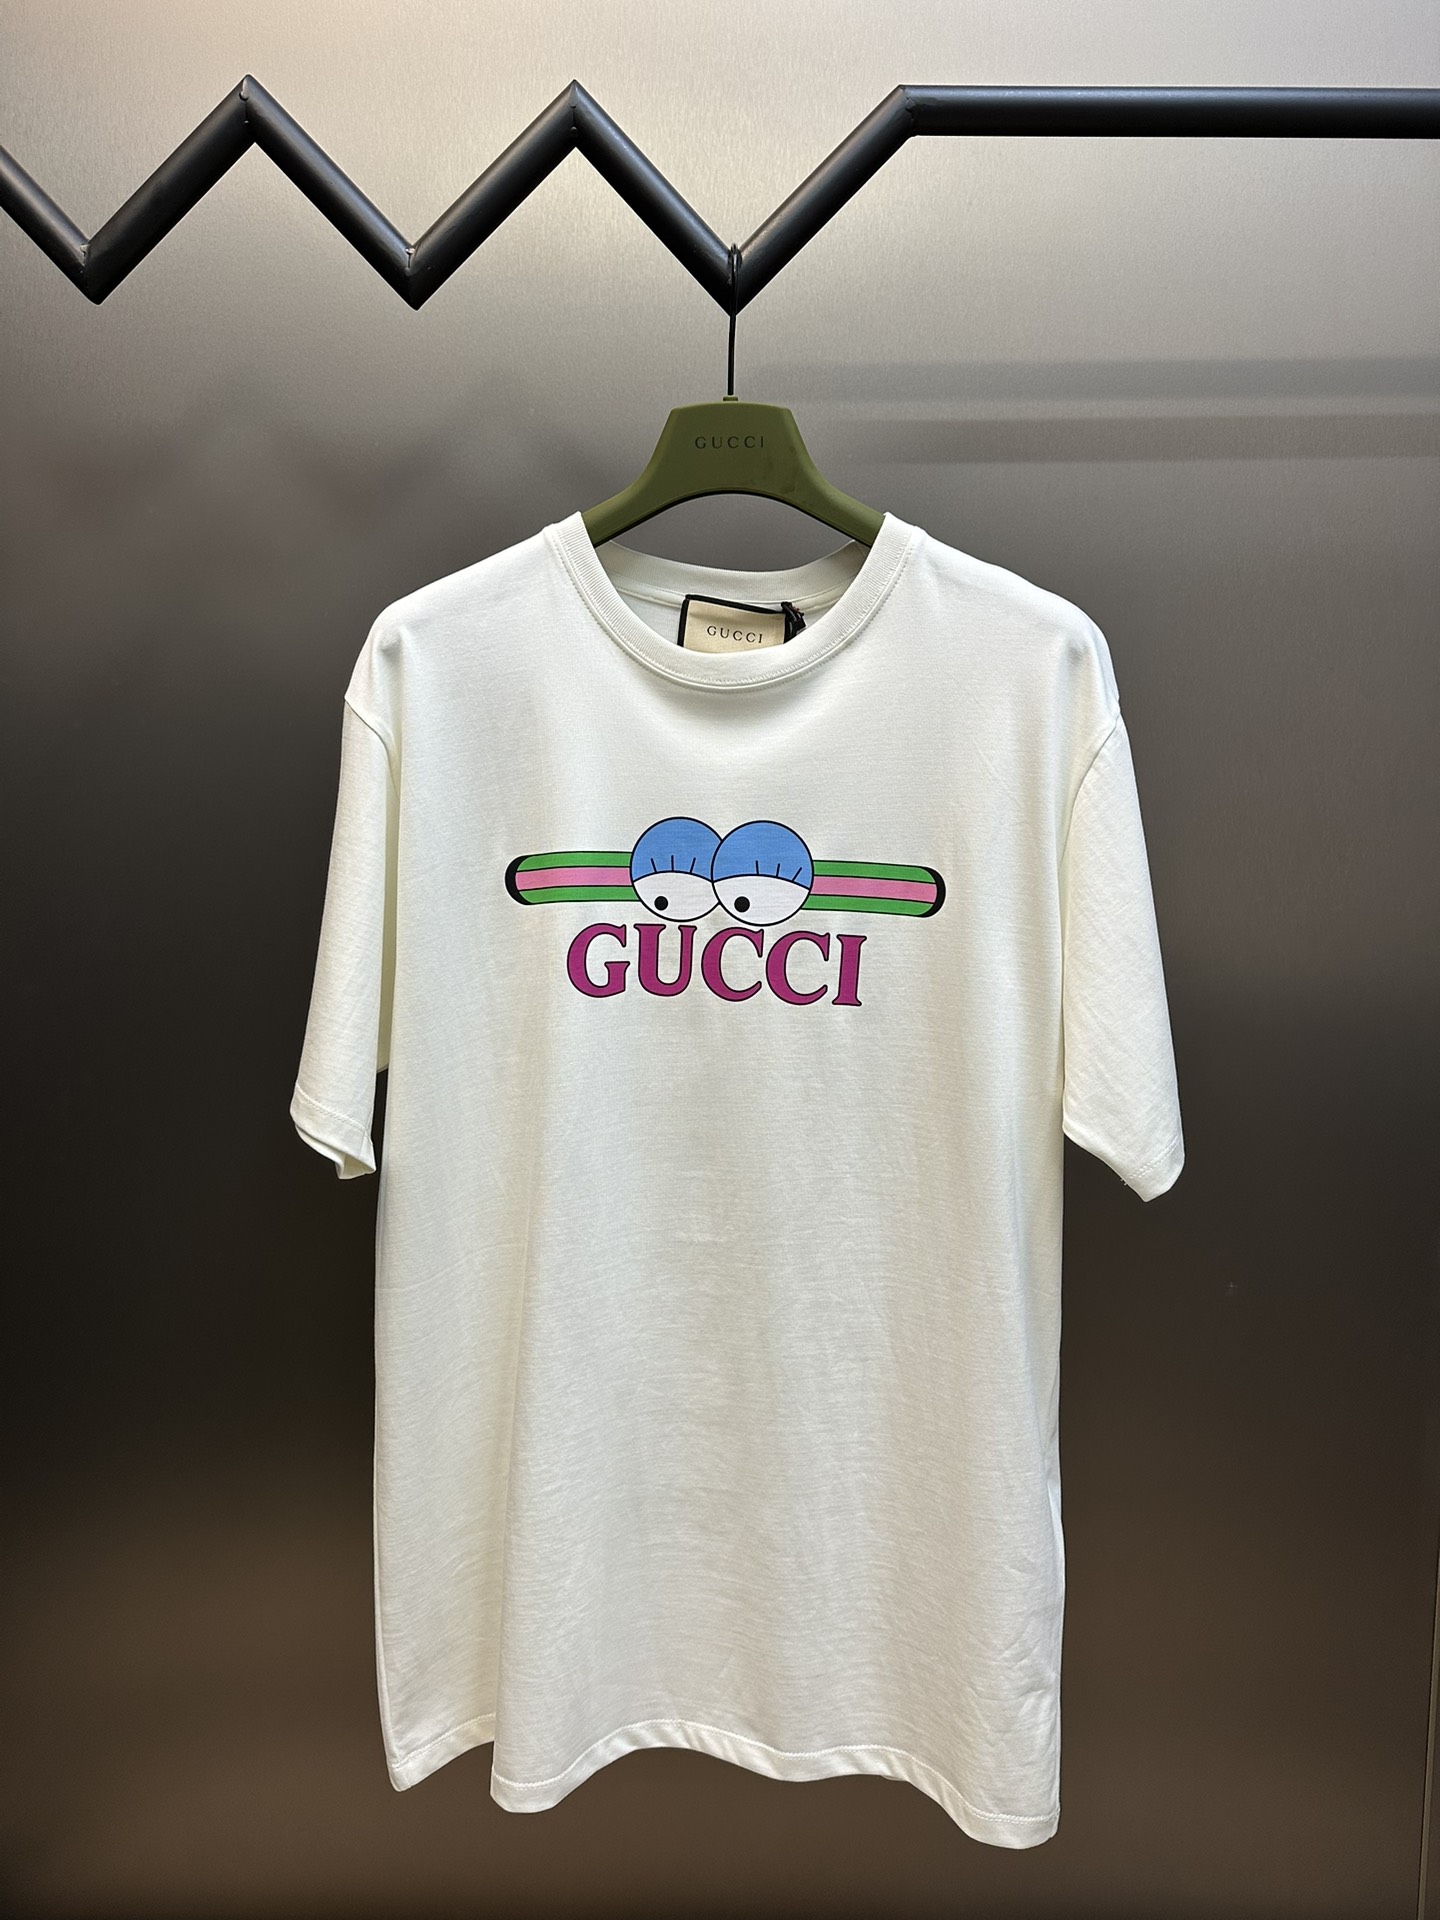 Gucci Clothing T-Shirt Printing Cotton Fabric Knitted Knitting Short Sleeve